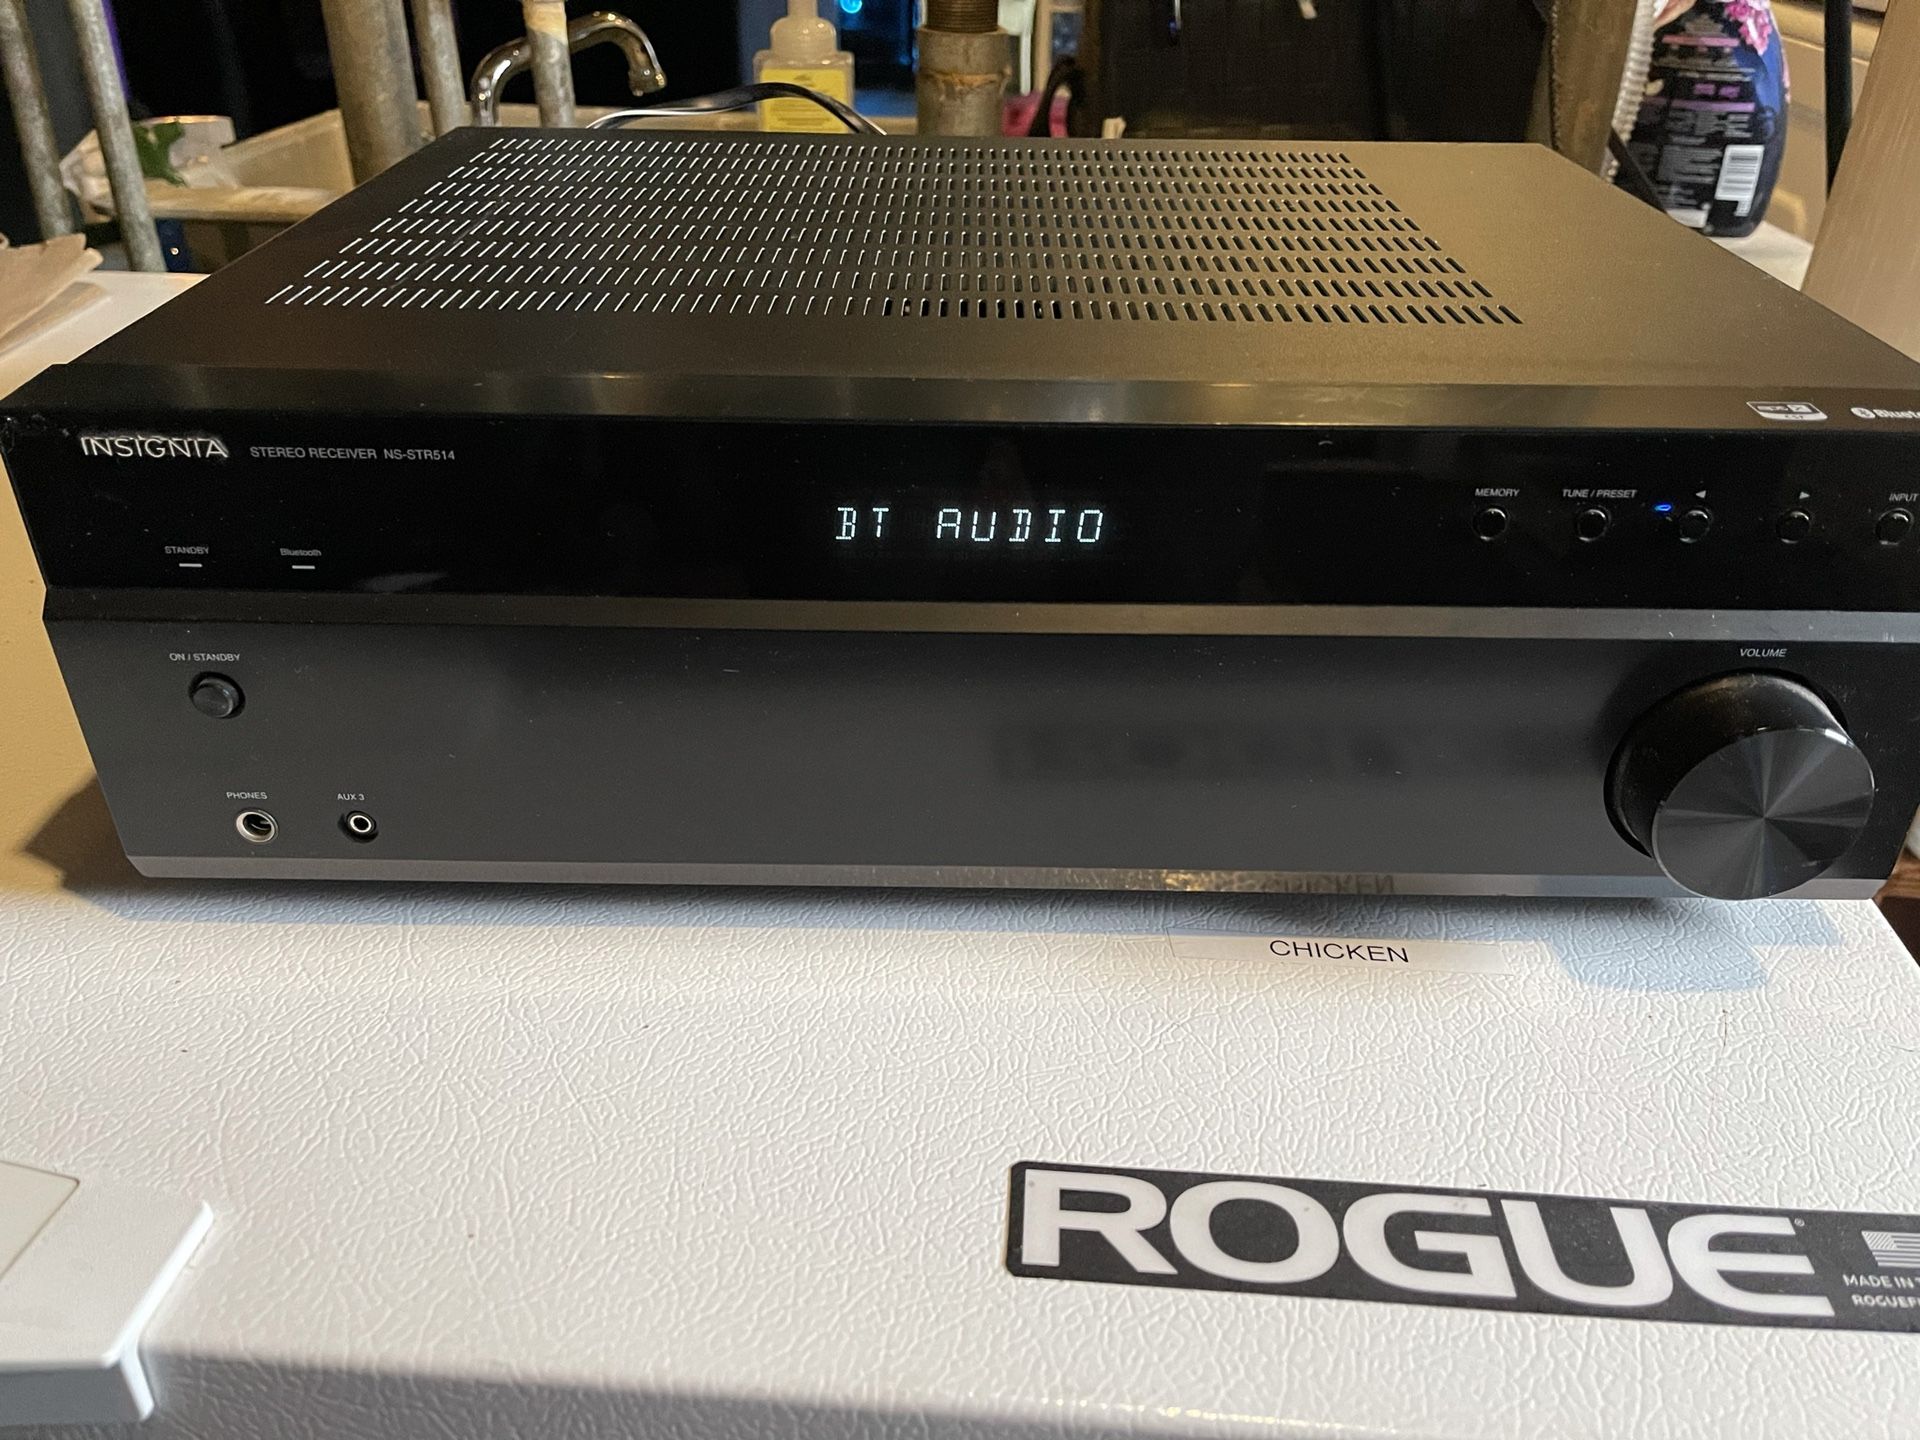 Insignia stereo receiver with Bluetooth.